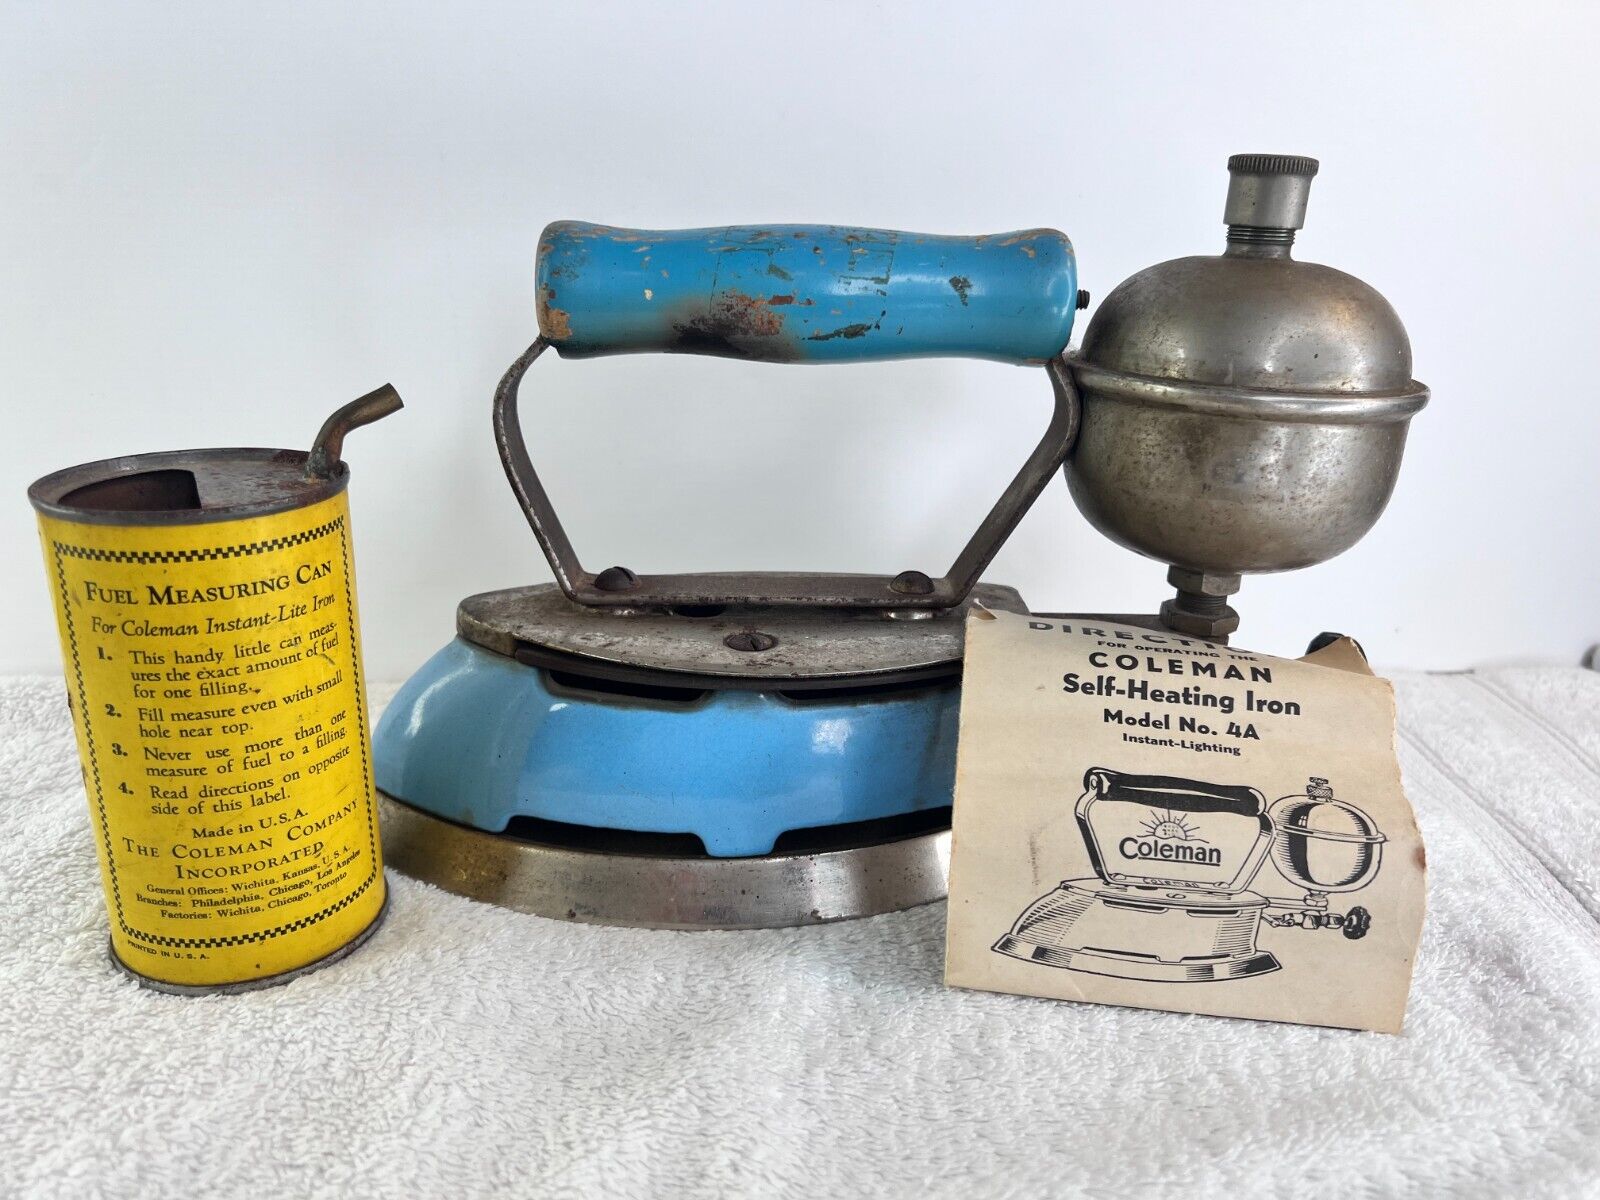 Vtg Coleman Model #4A Iron with Gas Can & Instructions